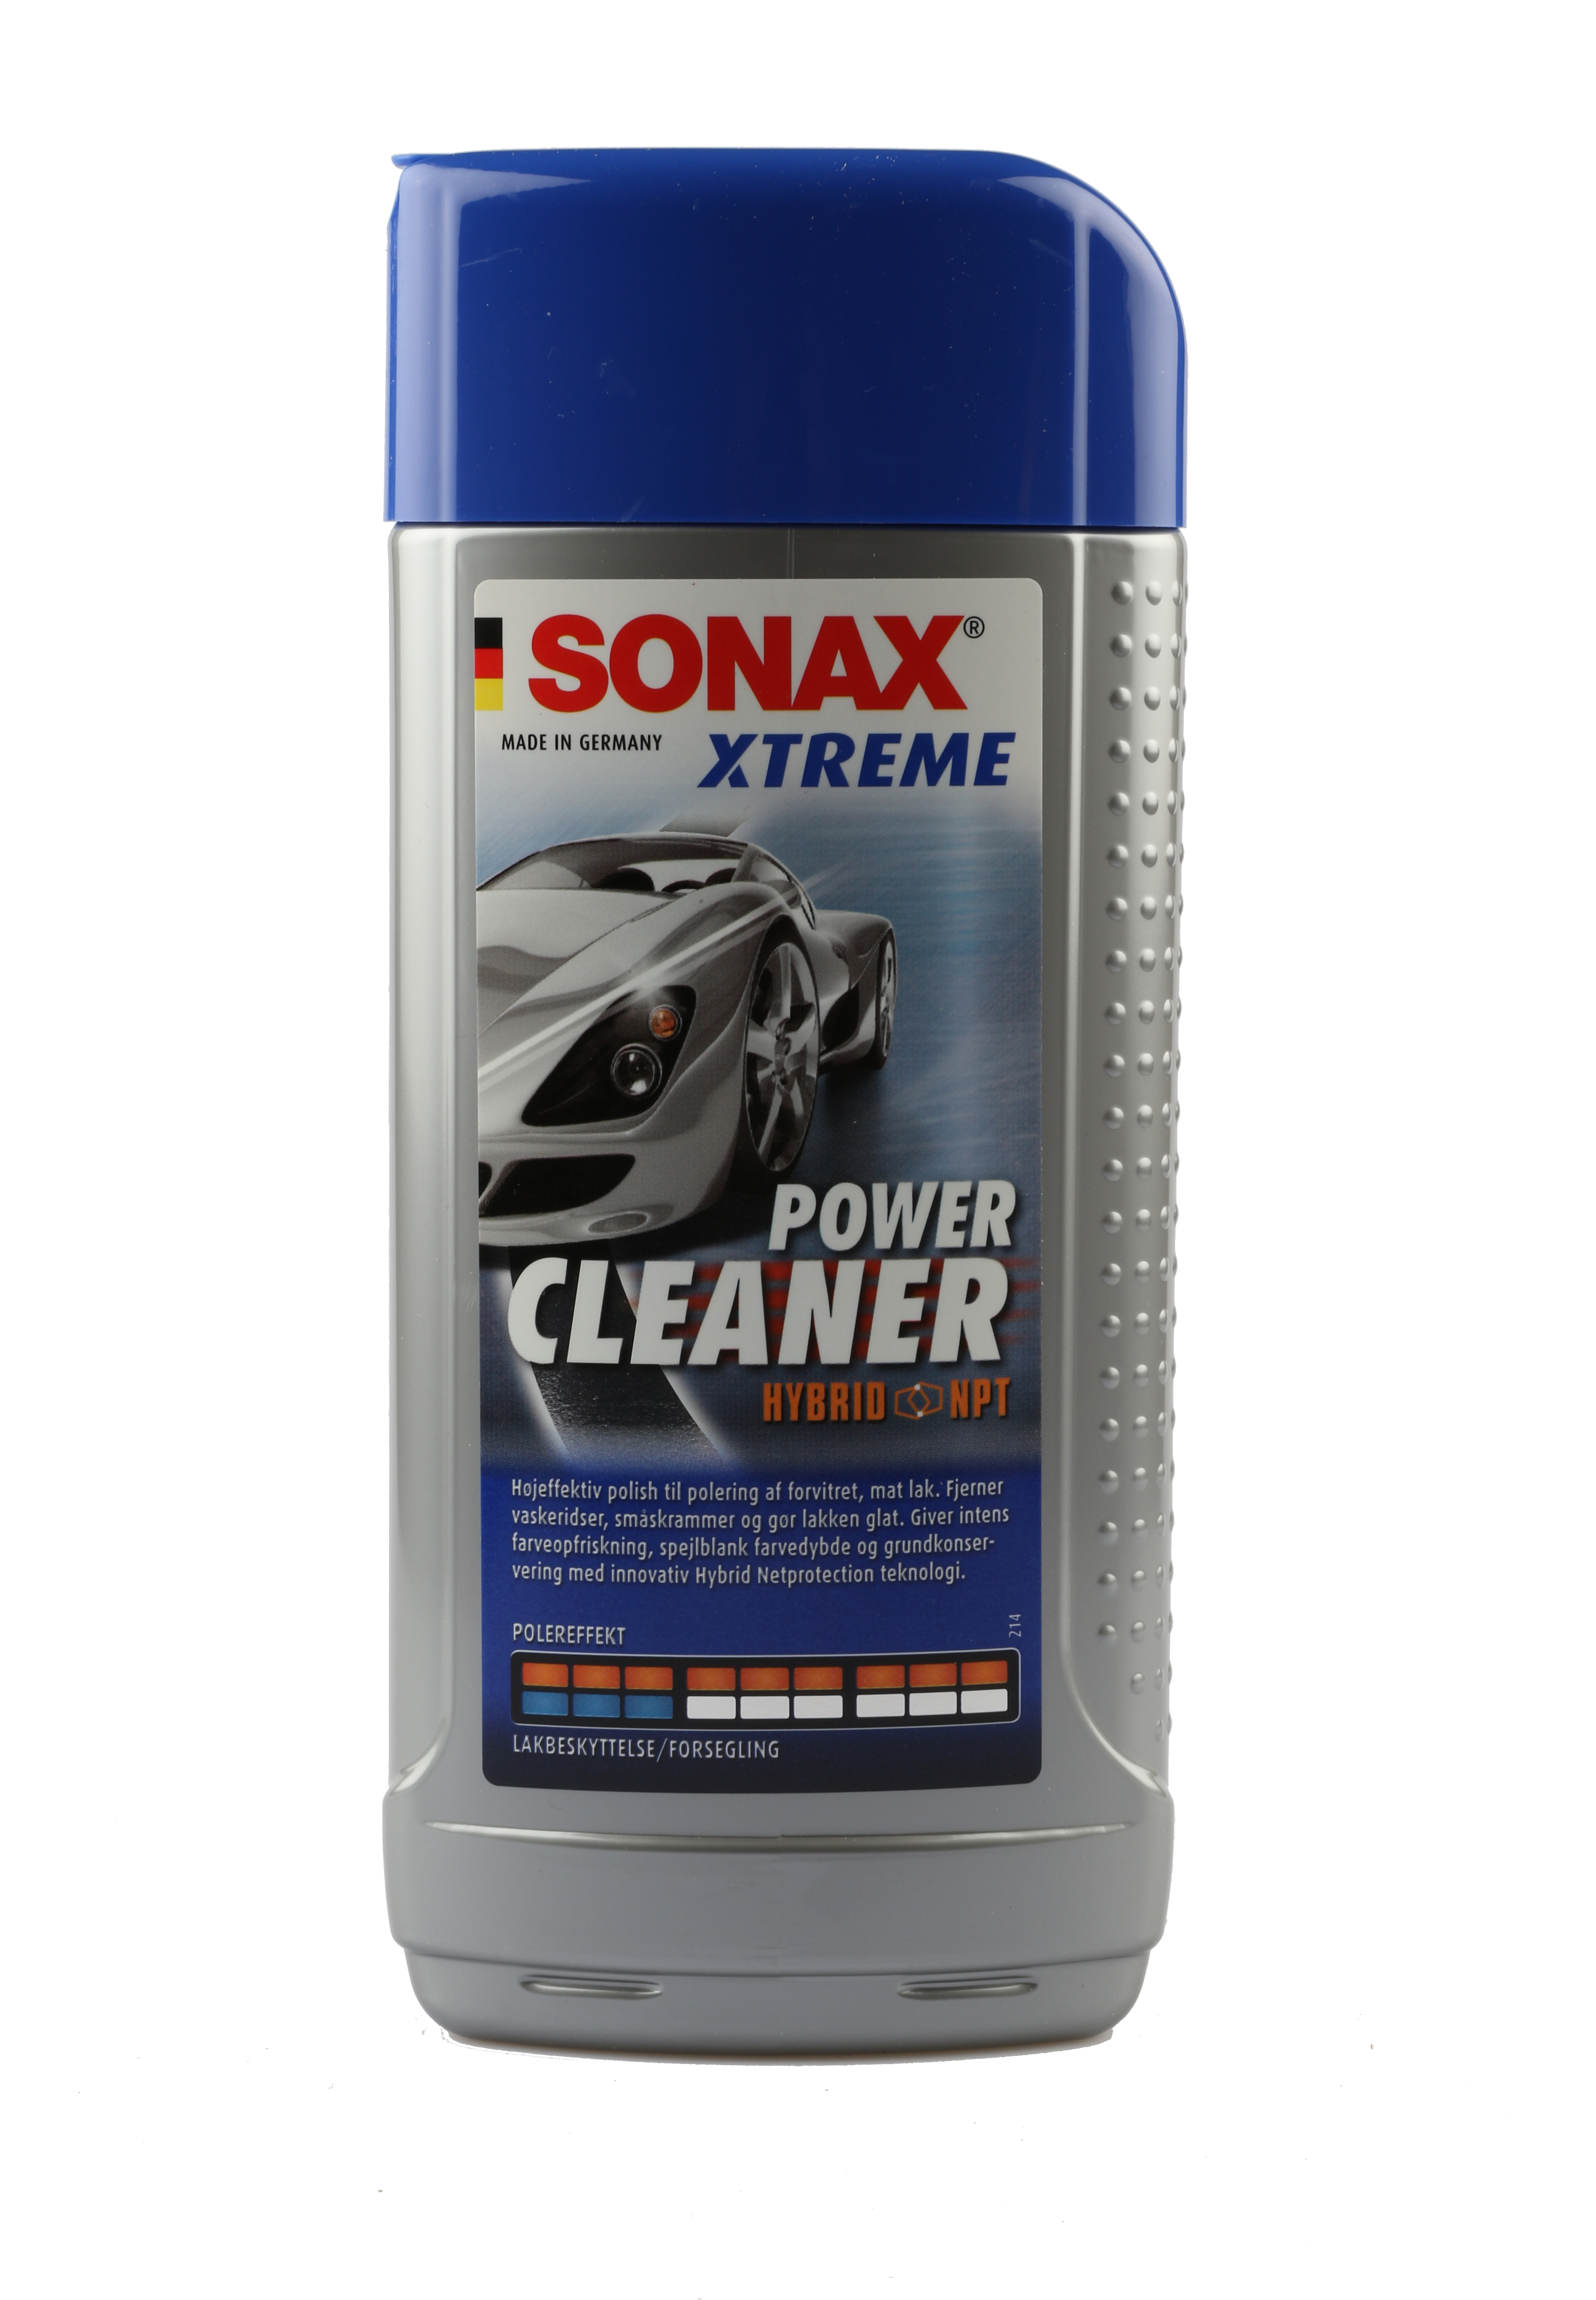 SONAX XTREME POWER CLEANER TOURGEAR